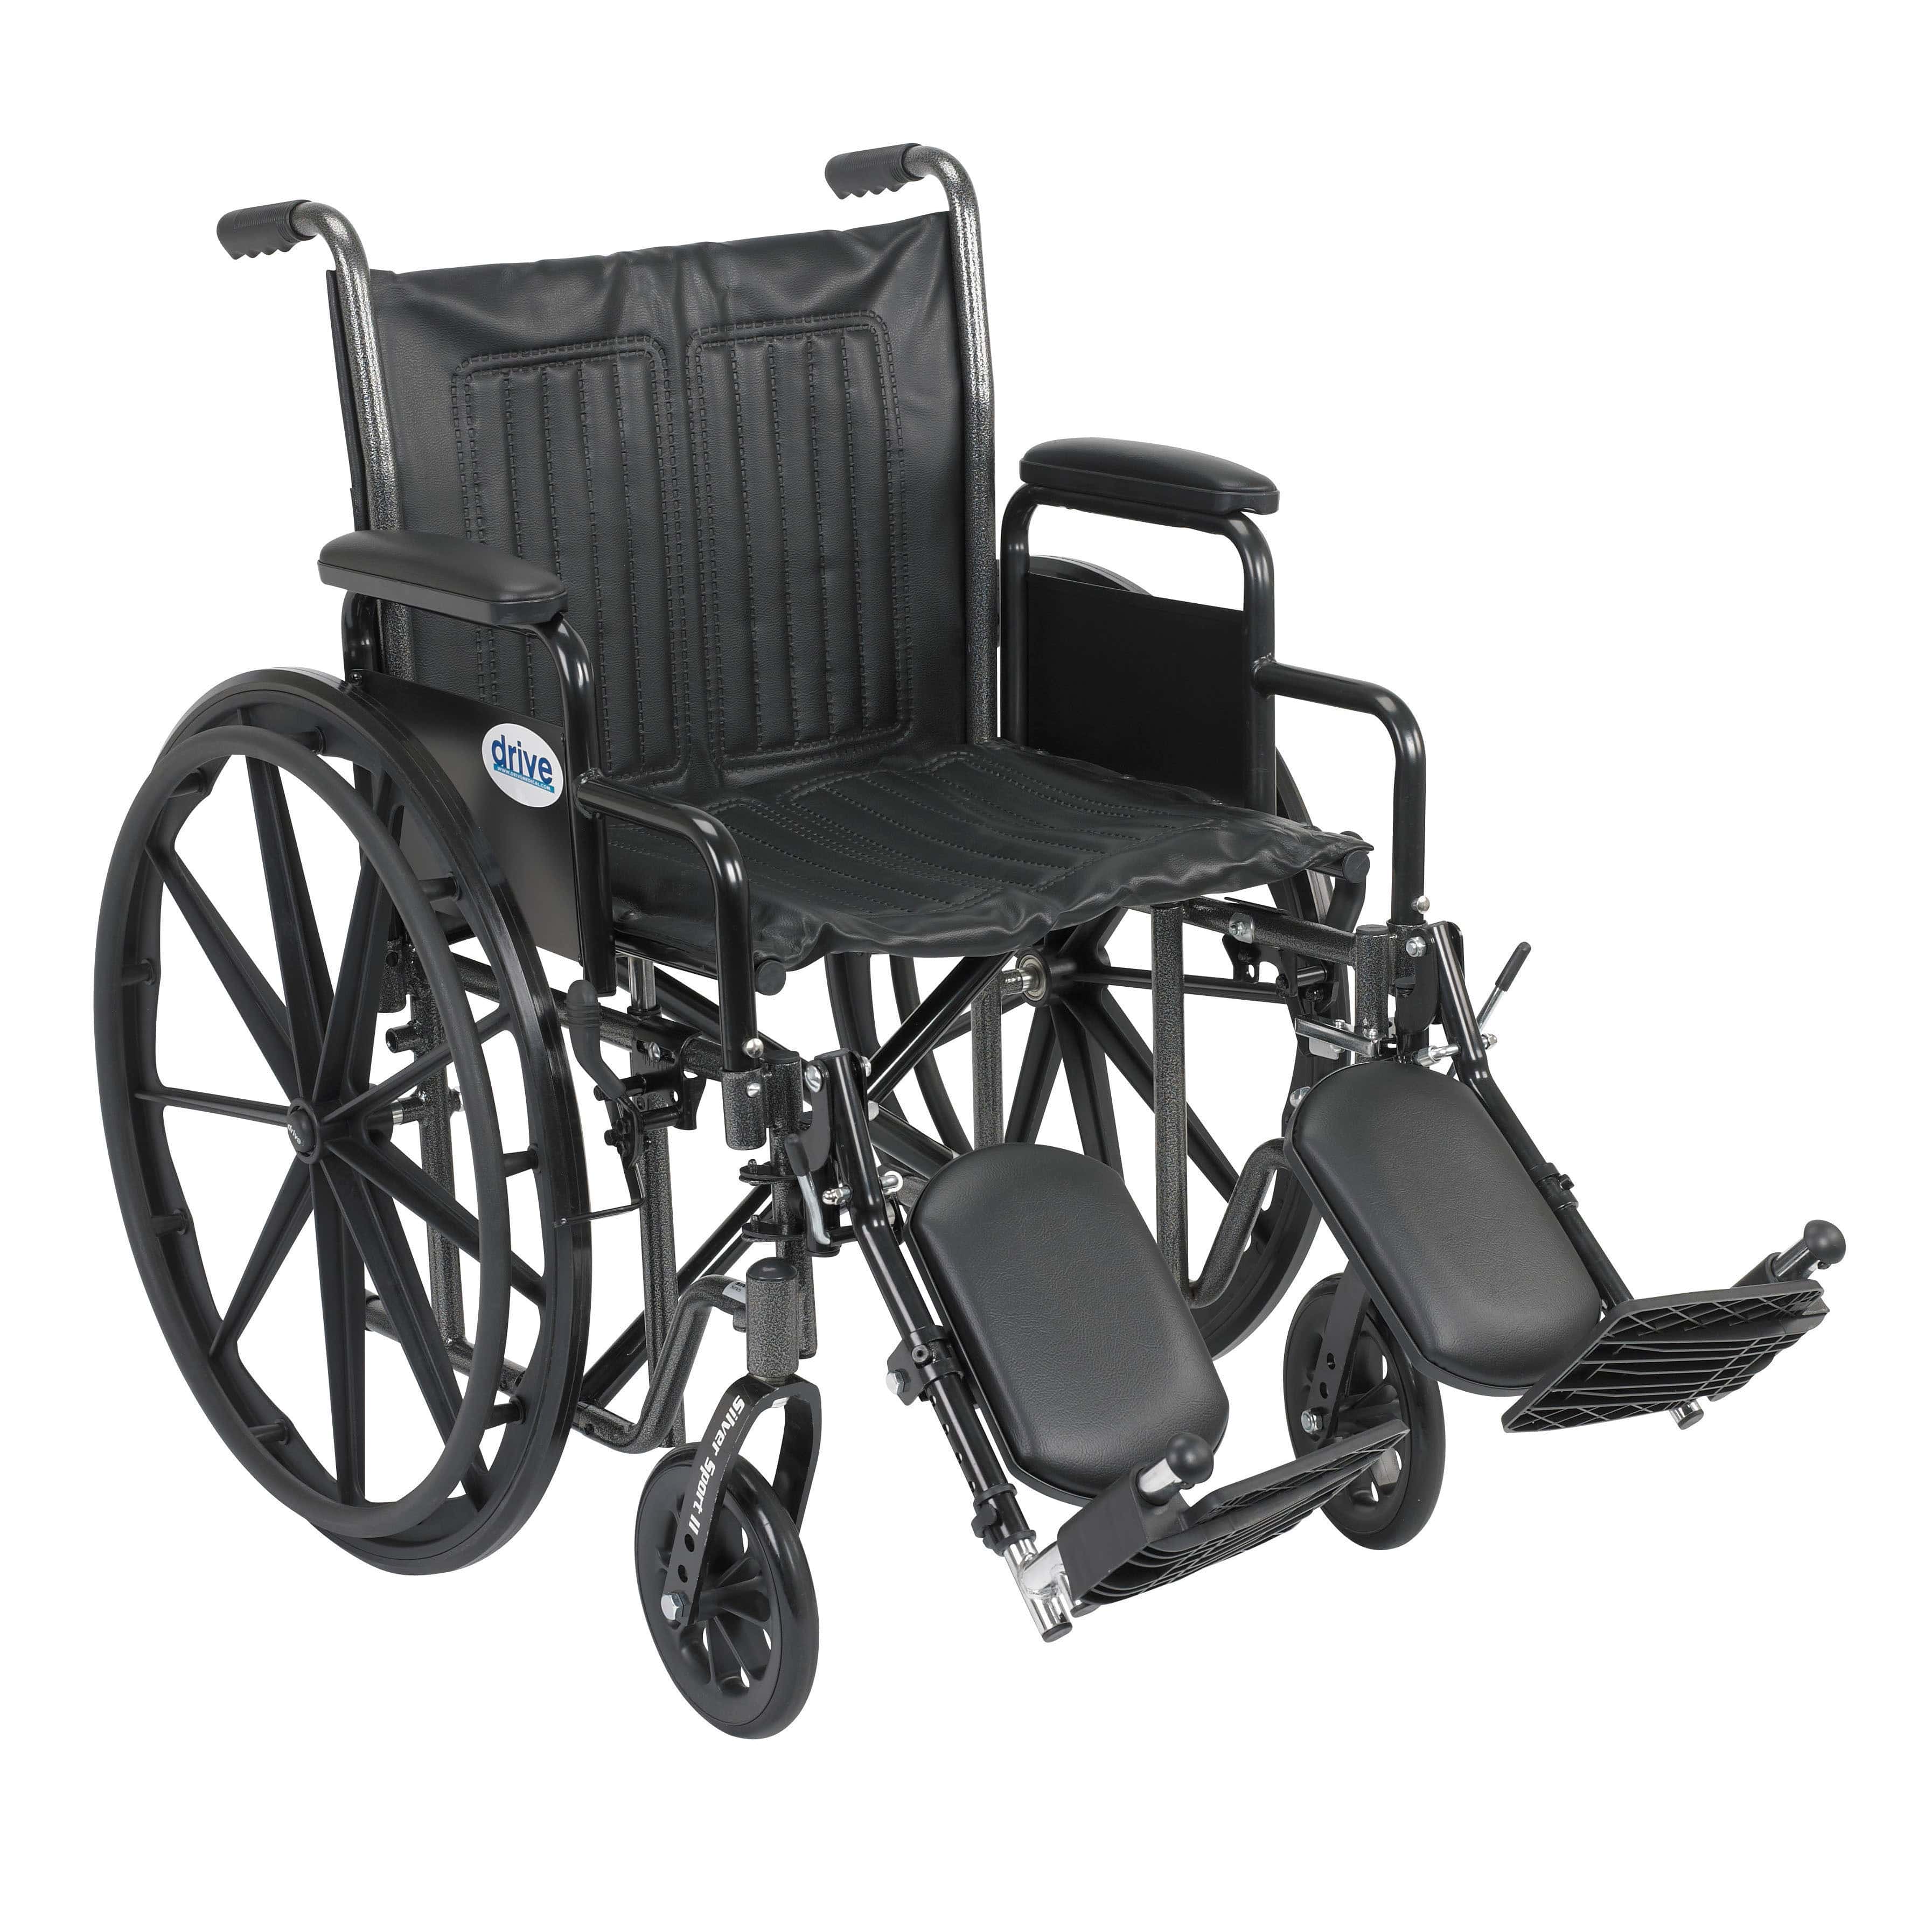 Drive Medical Wheelchairs/Standard Wheelchairs Detachable Desk Arms and Elevating Leg Rests / 20" Seat Drive Medical Silver Sport 2 Wheelchair